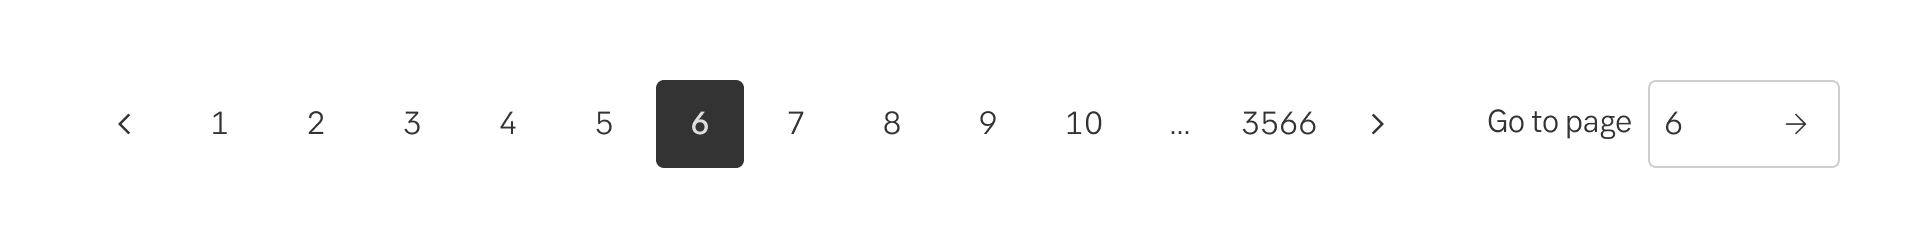 Selected state for pagination